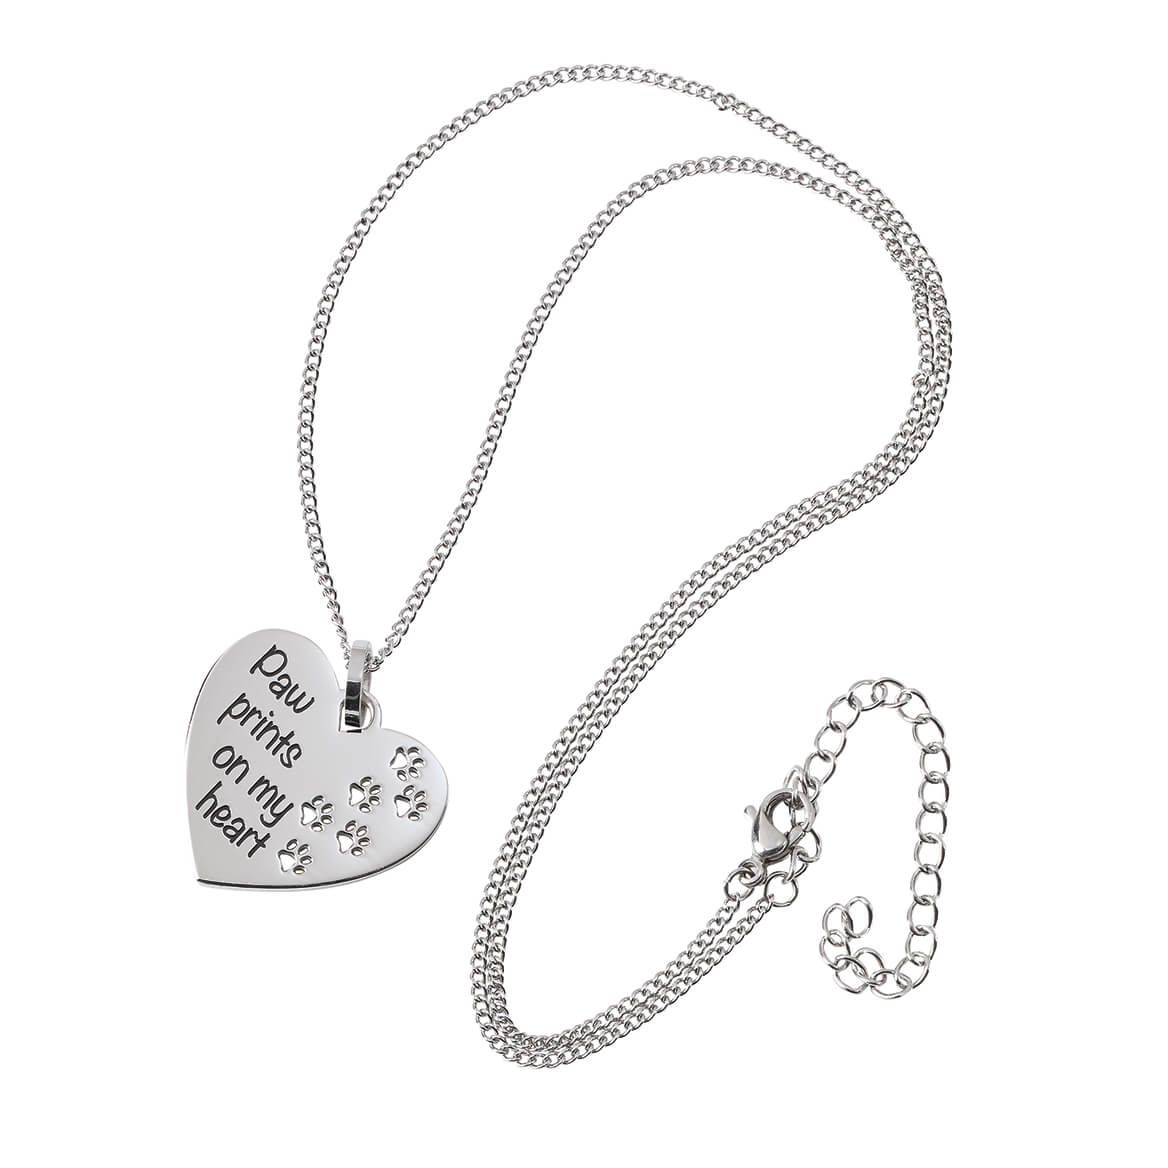 Personalized Paw Prints On My Heart Necklace + '-' + 375748